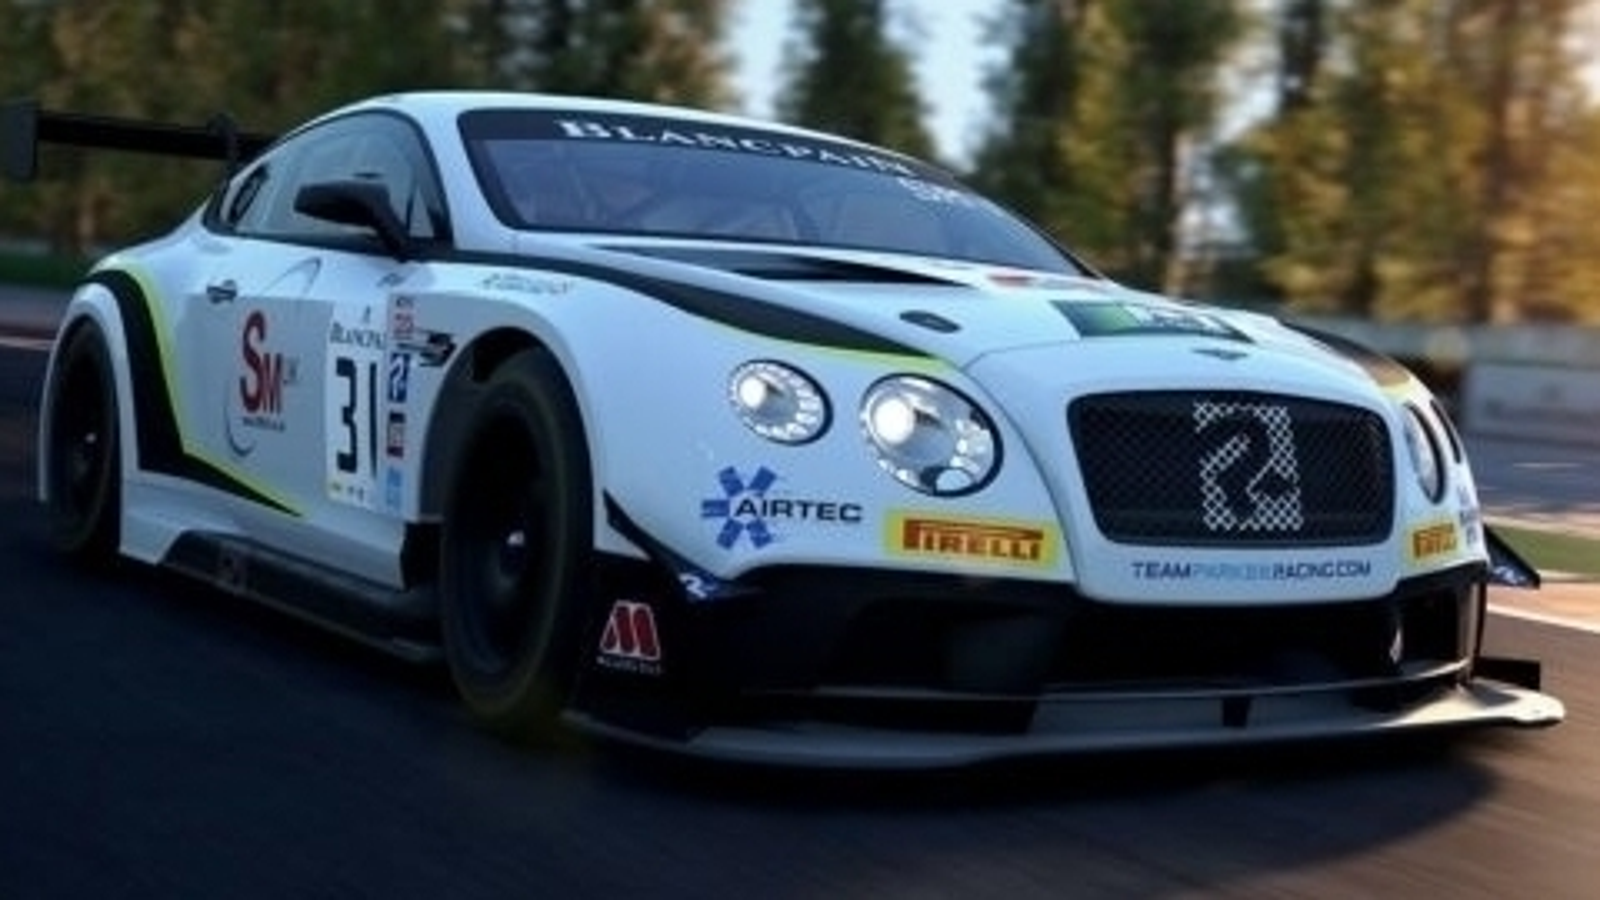 Assetto Corsa Competizione Gets New Trailer Ahead of PS5 and Xbox Series  X